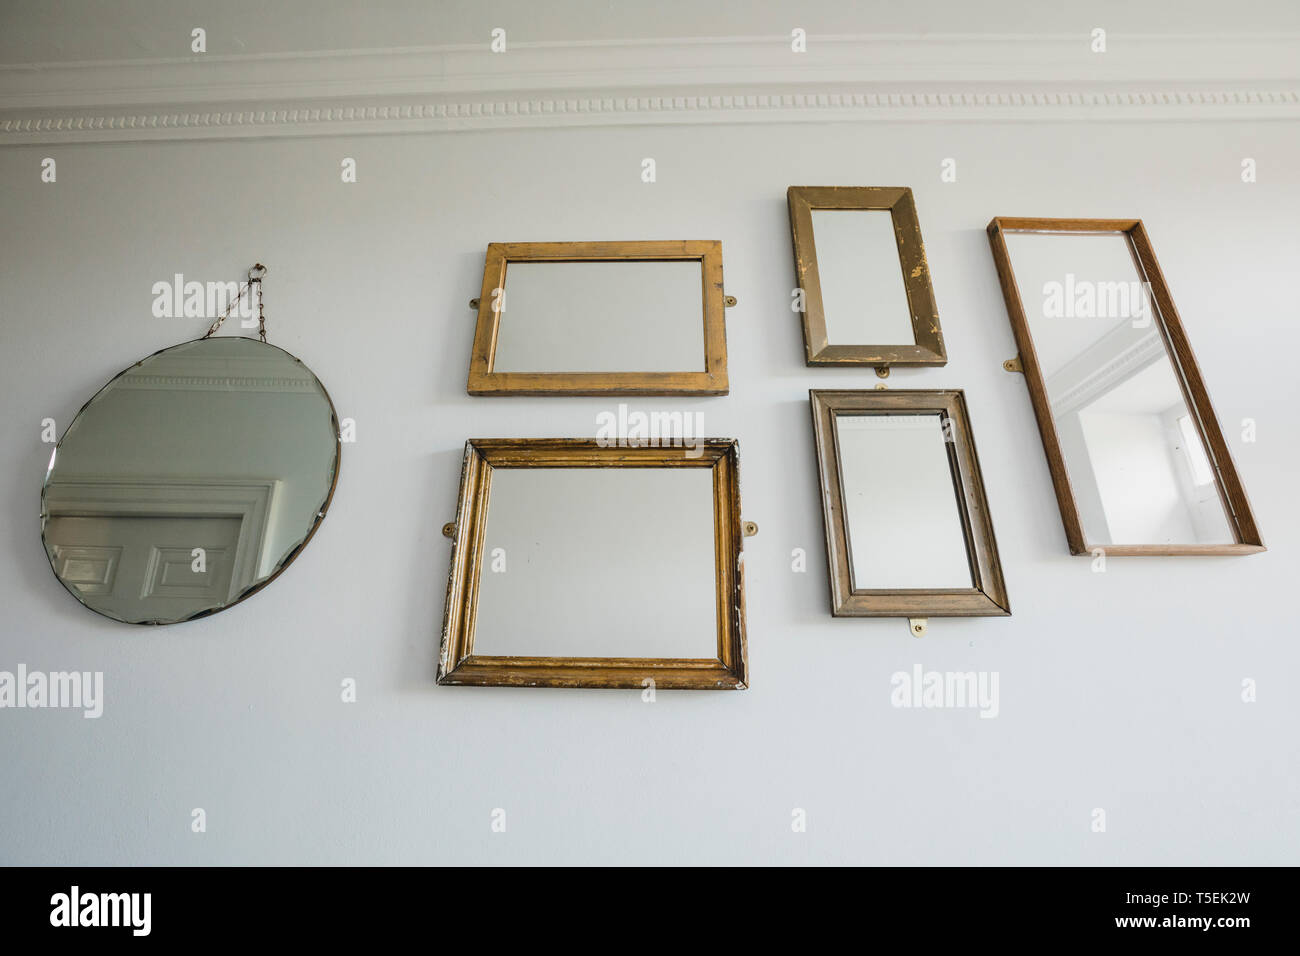 Low angle view of a wall in a house which has a variety of different shaped mirrors hanging on the wall. Stock Photo